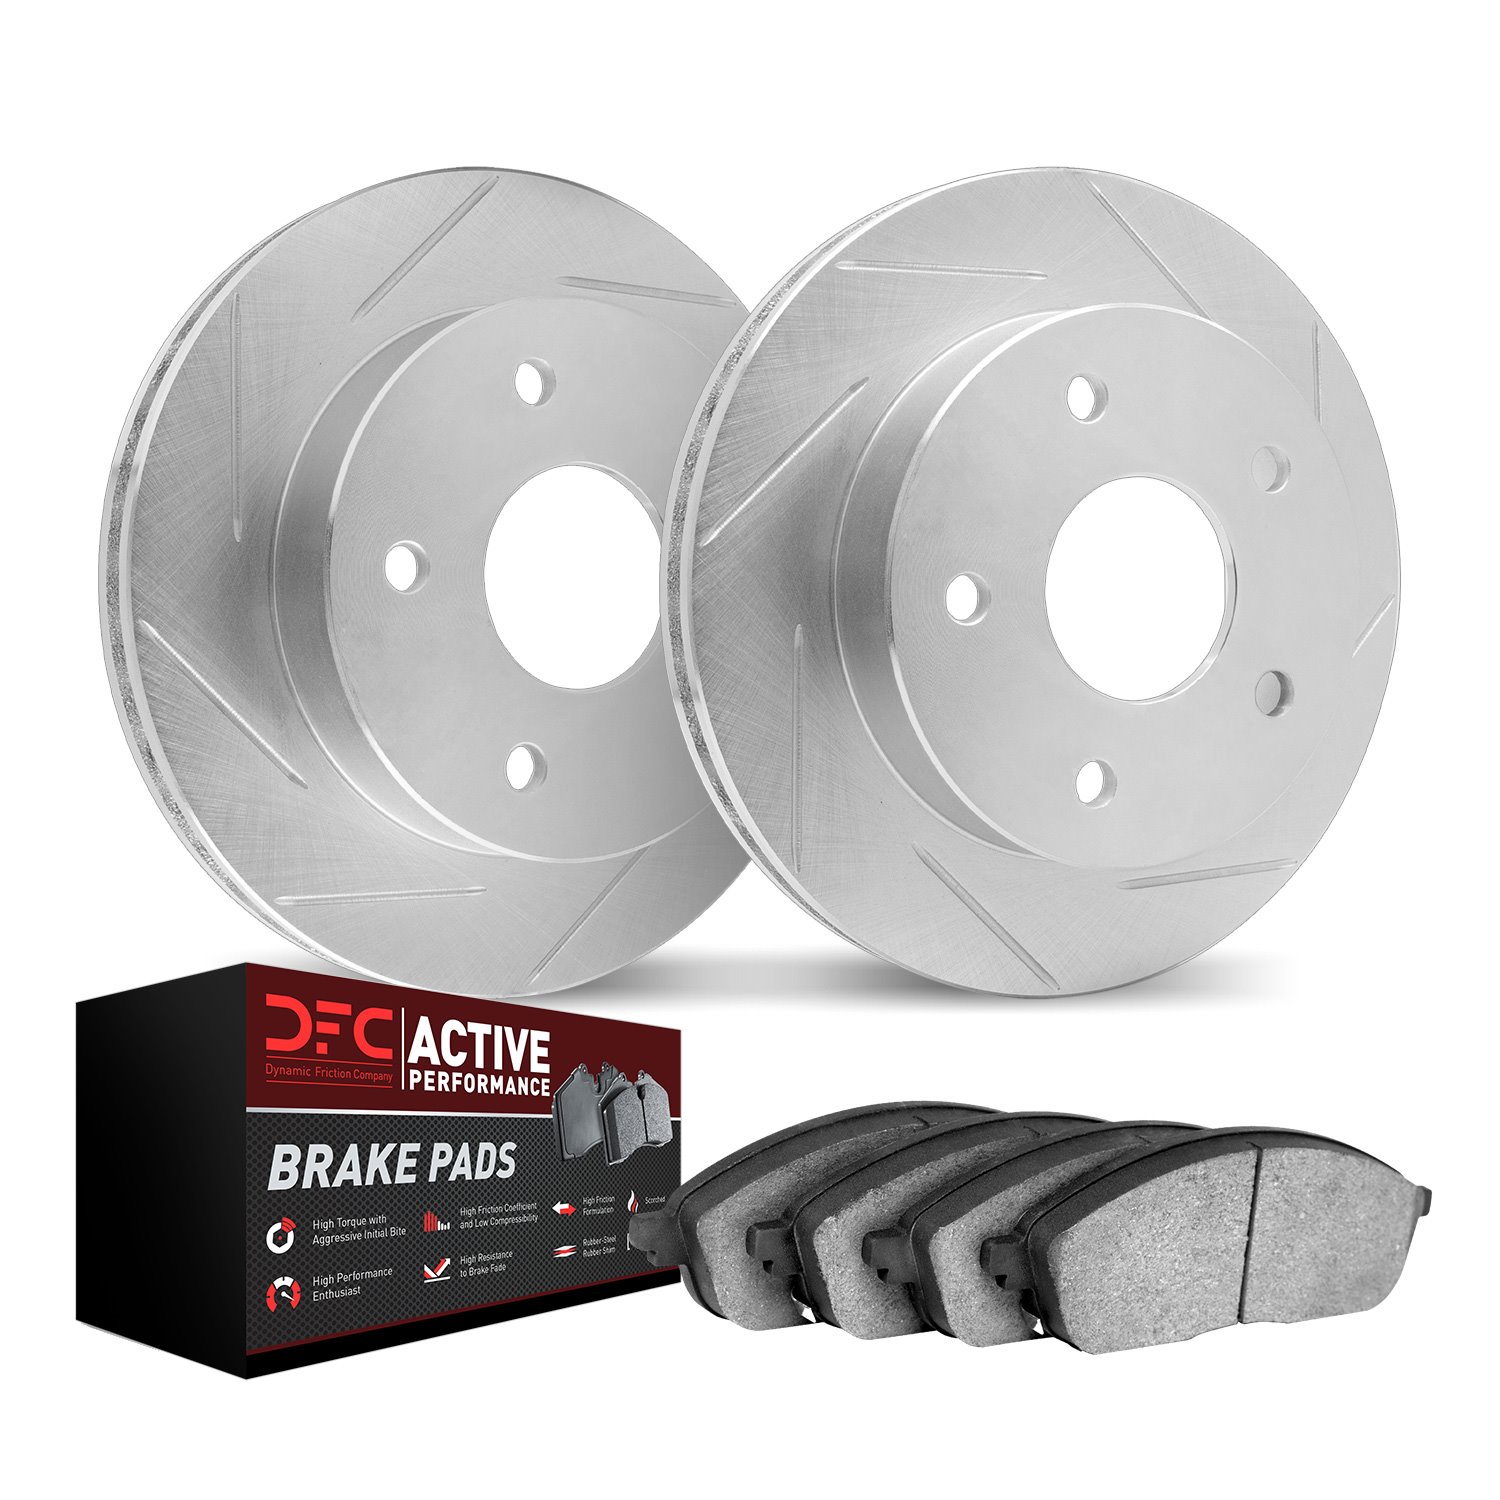 2702-31217 Geoperformance Slotted Brake Rotors with Active Performance Pads Kits, Fits Select Multiple Makes/Models, Position: F